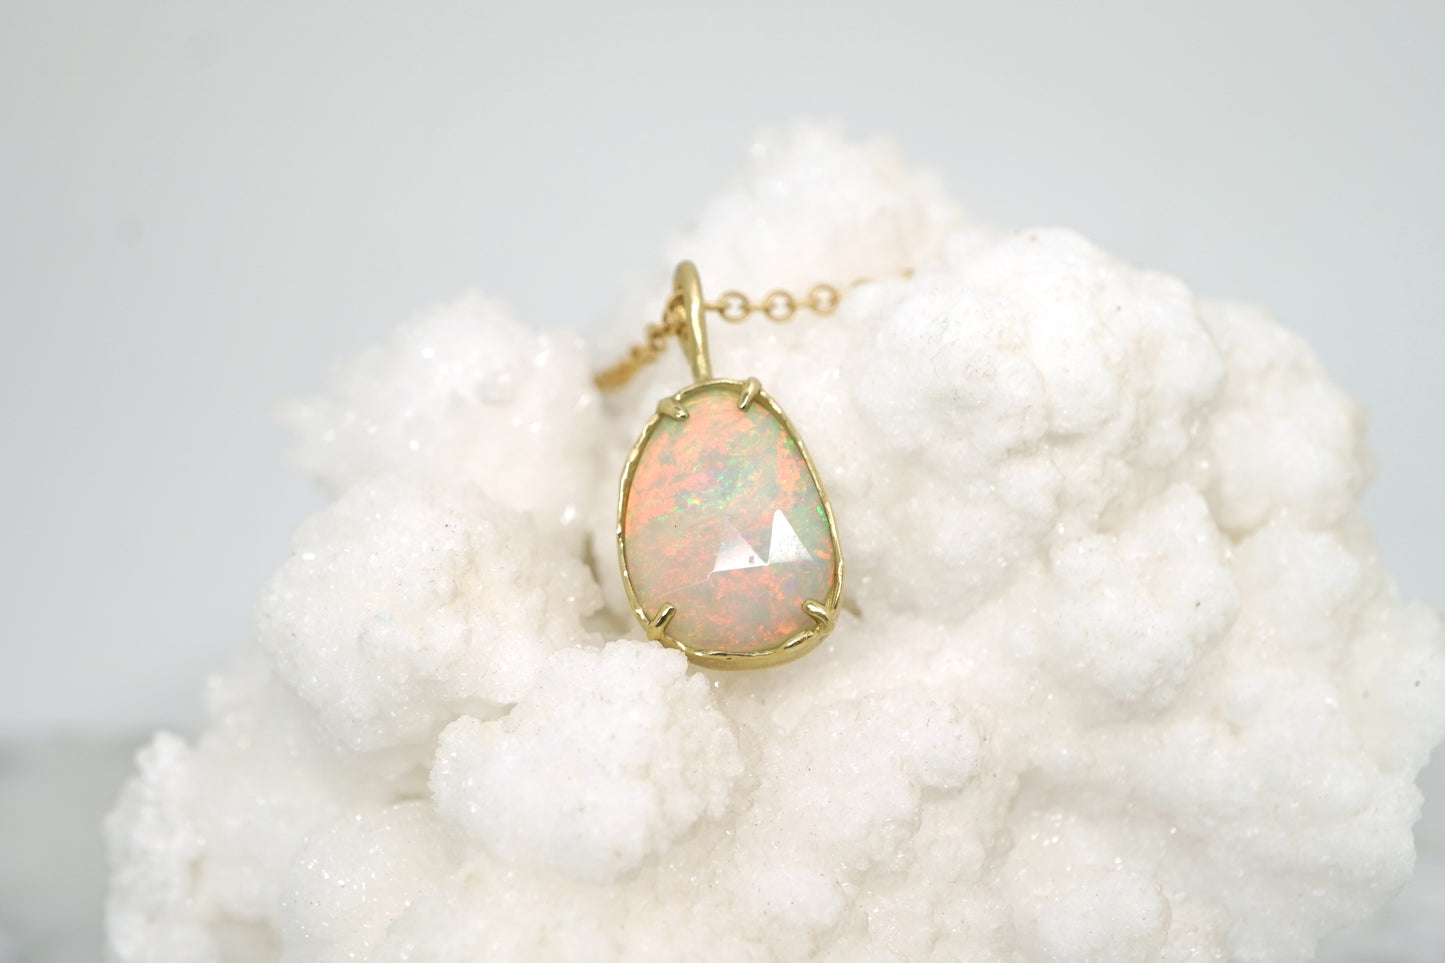 Opal Pendant with organic texture in 14k gold